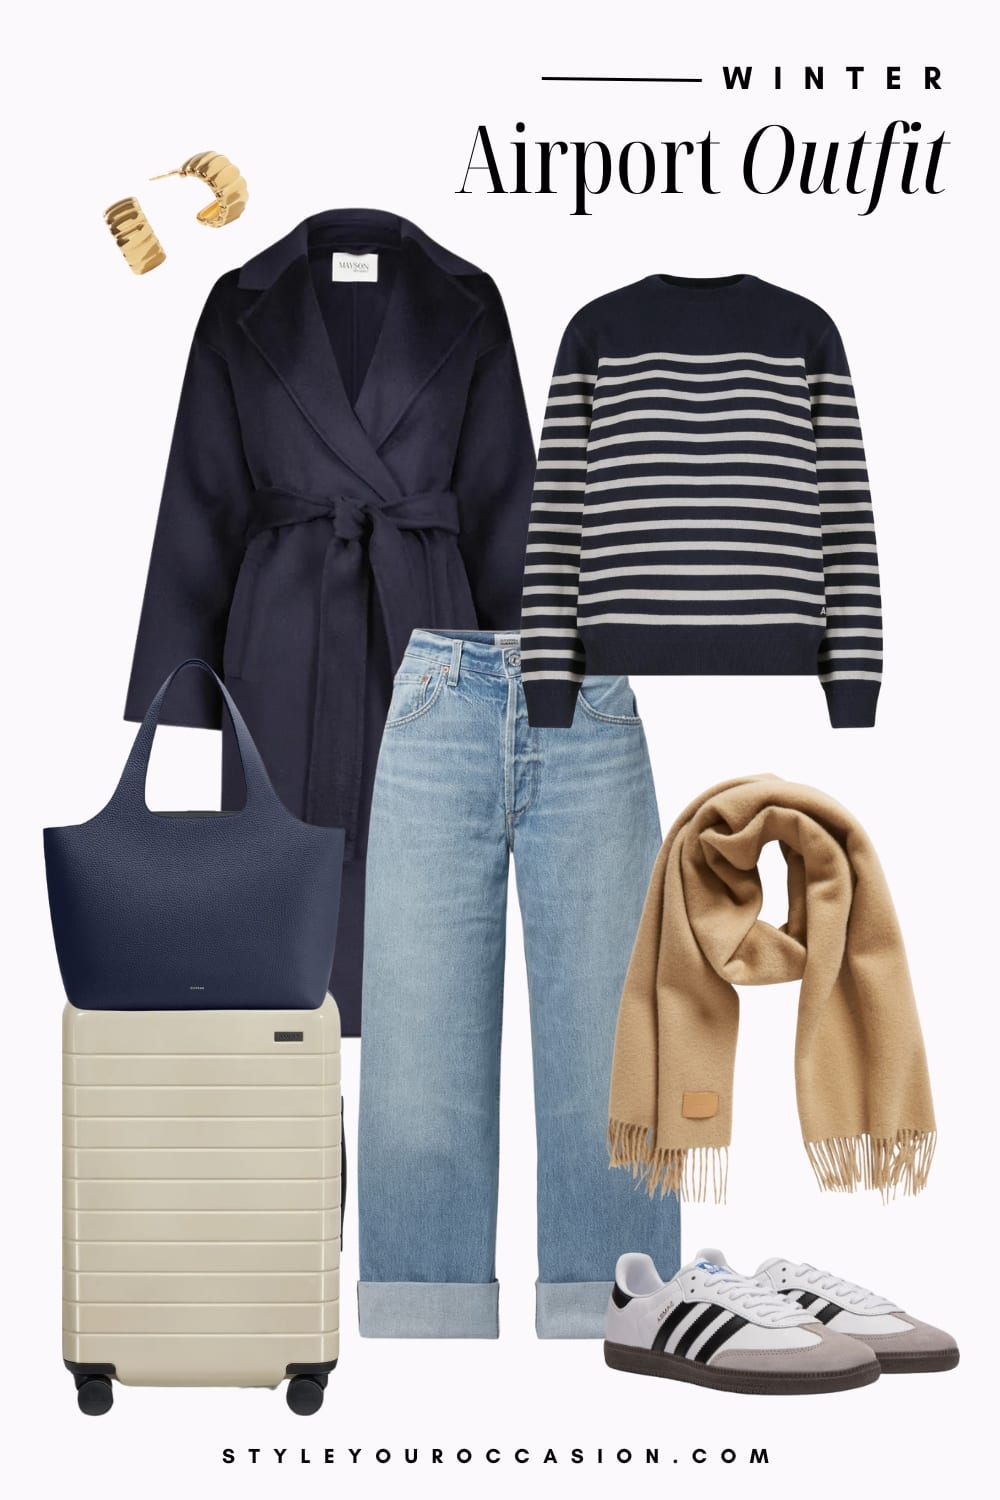 Graphic of a winter airport outfit including jeans, a striped sweater, a navy coat and sneakers.